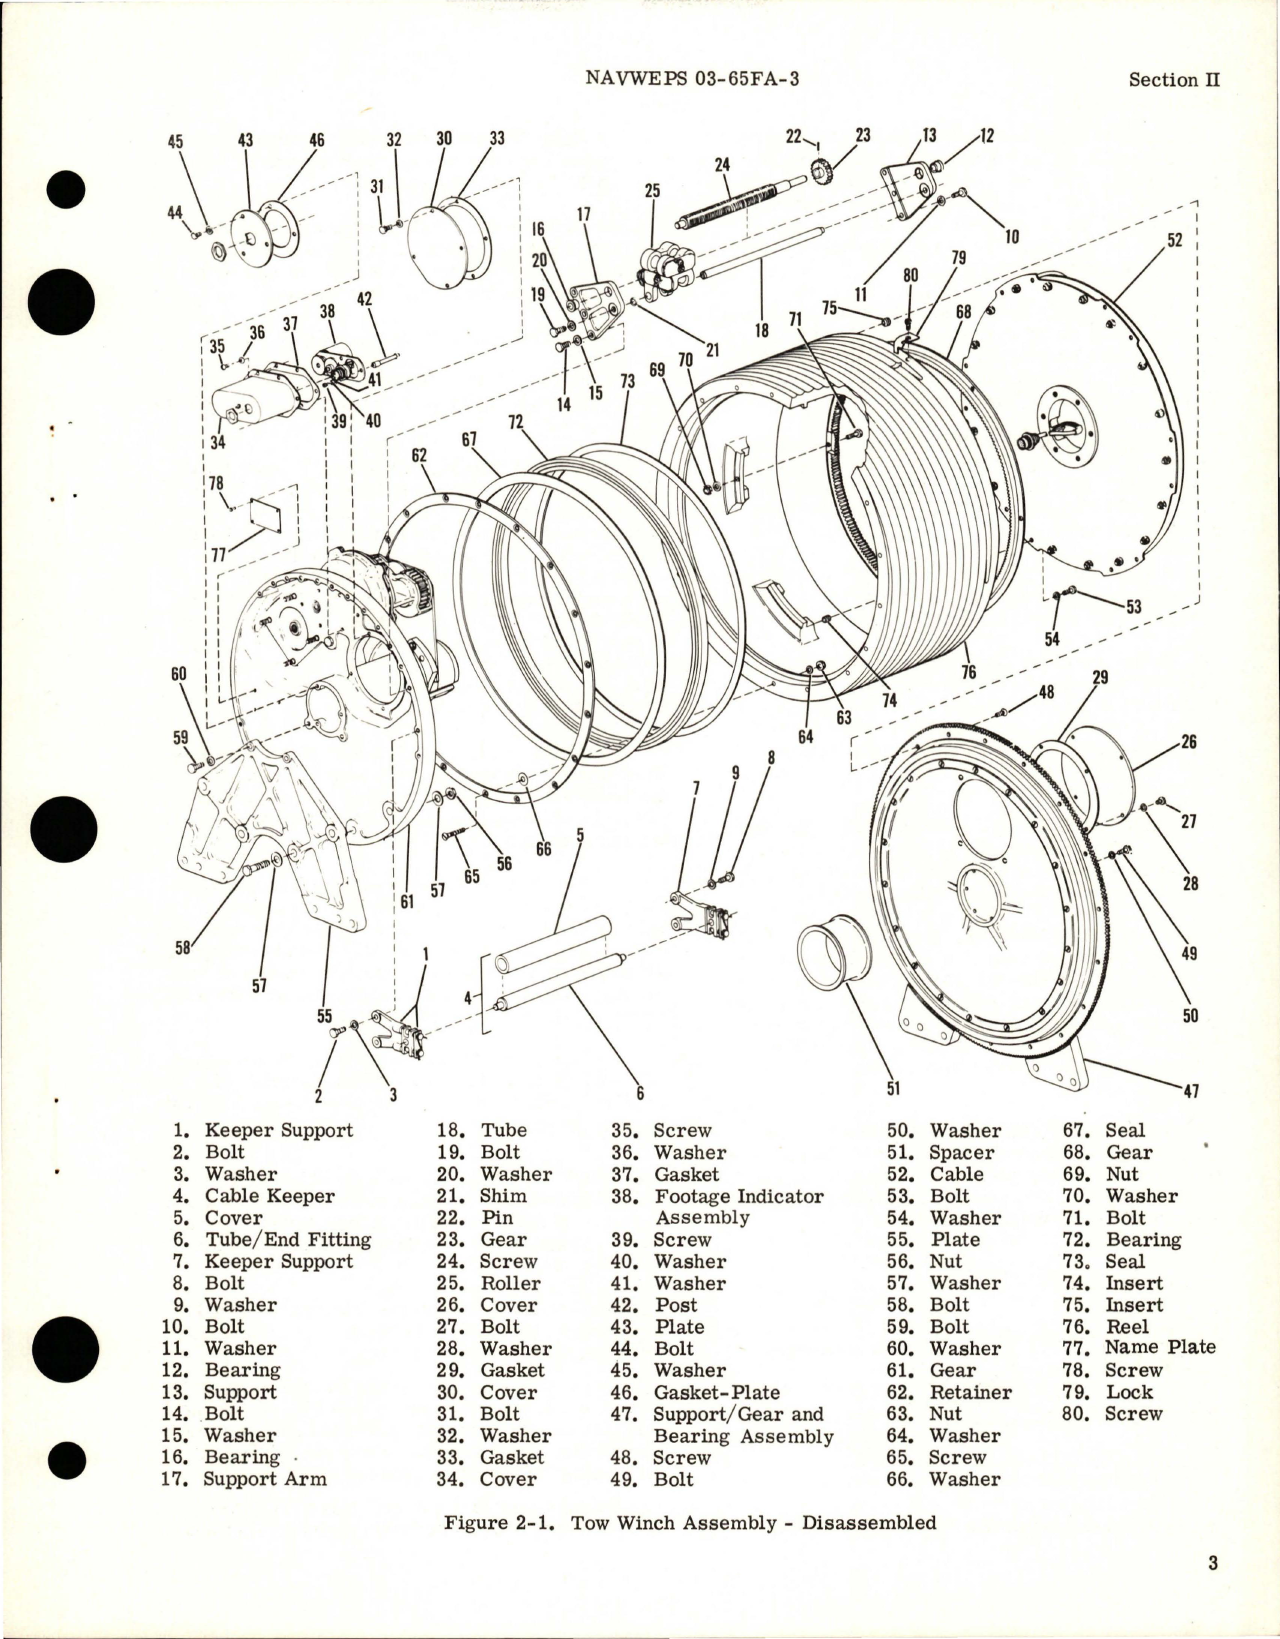 Sample page 7 from AirCorps Library document: Overhaul Instructions for Tow Winch Assembly - Part 172700